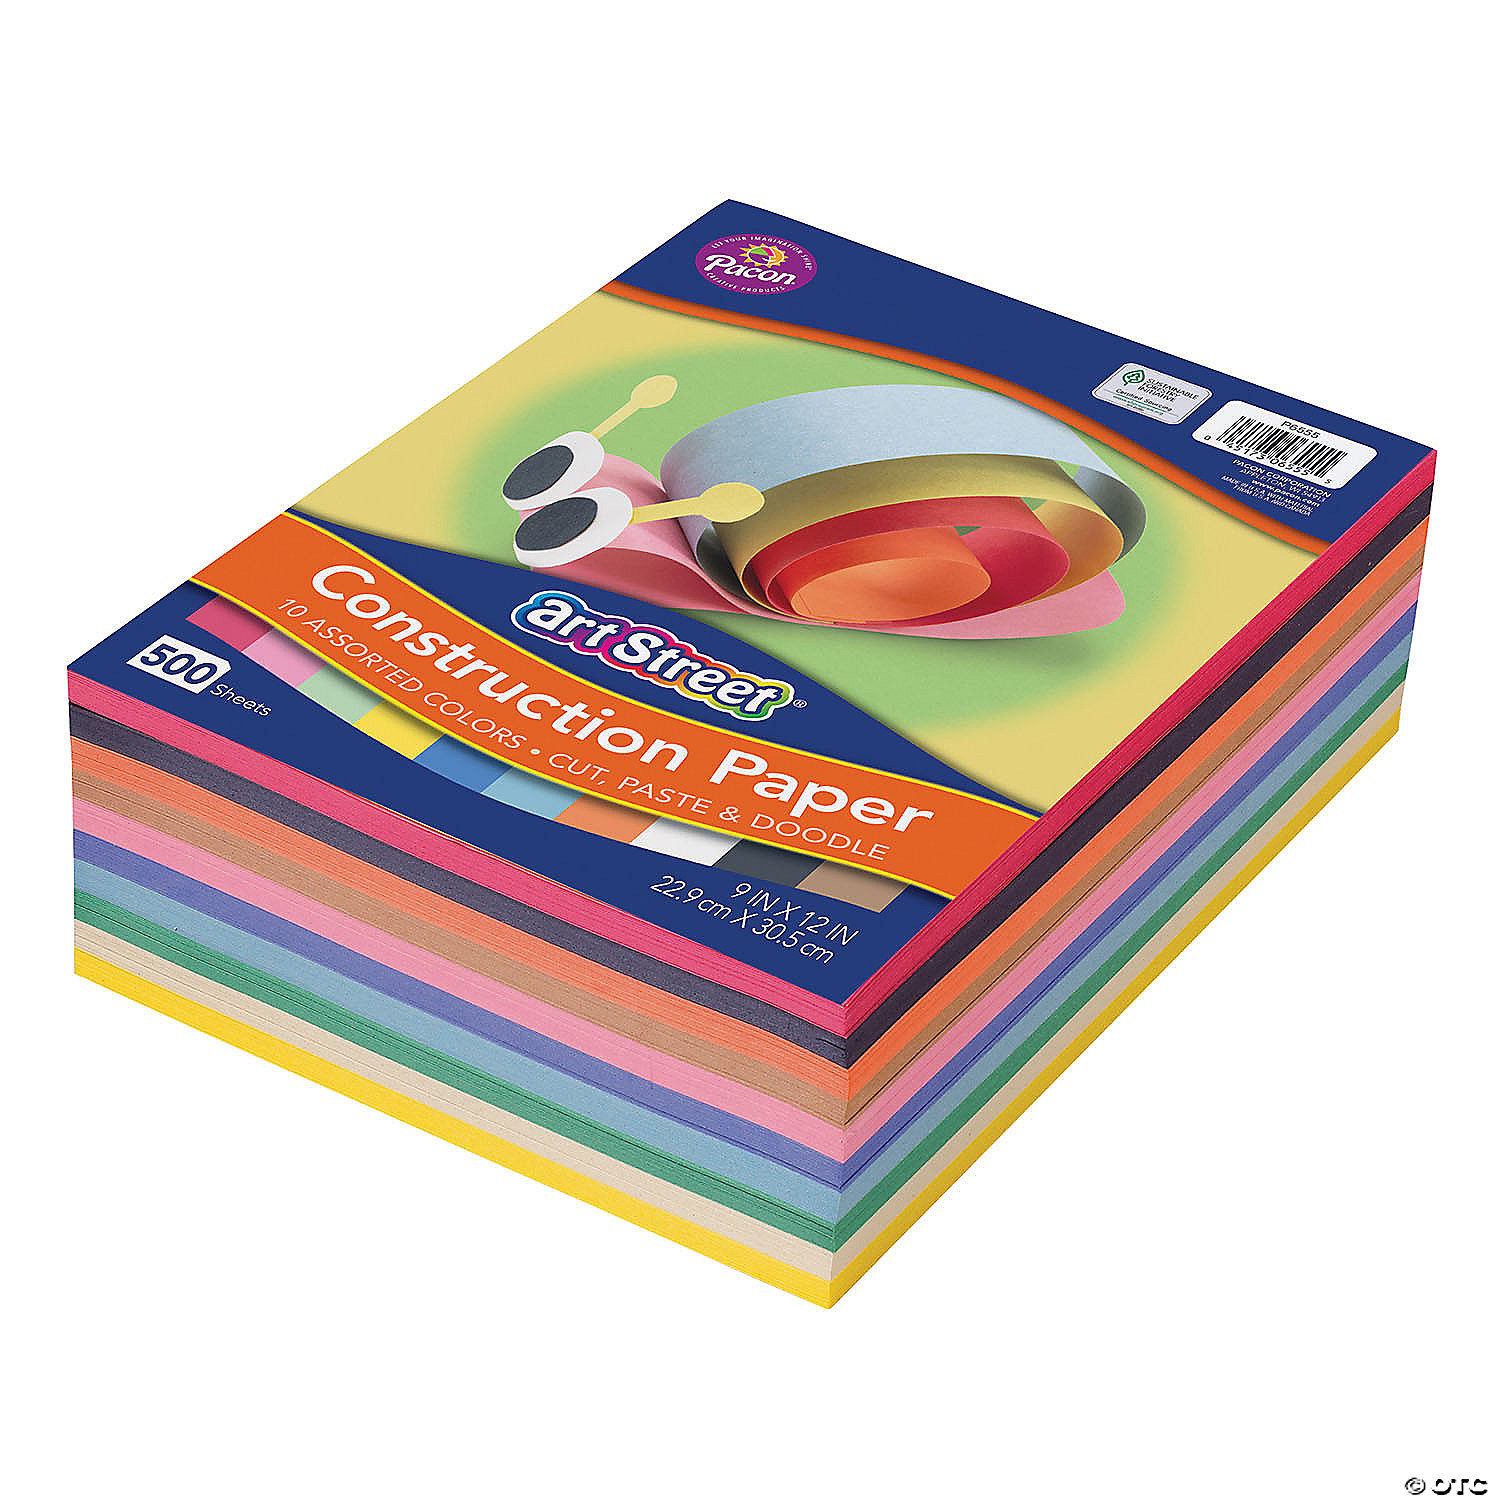 Pack of 2 Childcraft Construction Paper 500 Sheets 9 x 12 Inches 1465886 Assorted Colors 